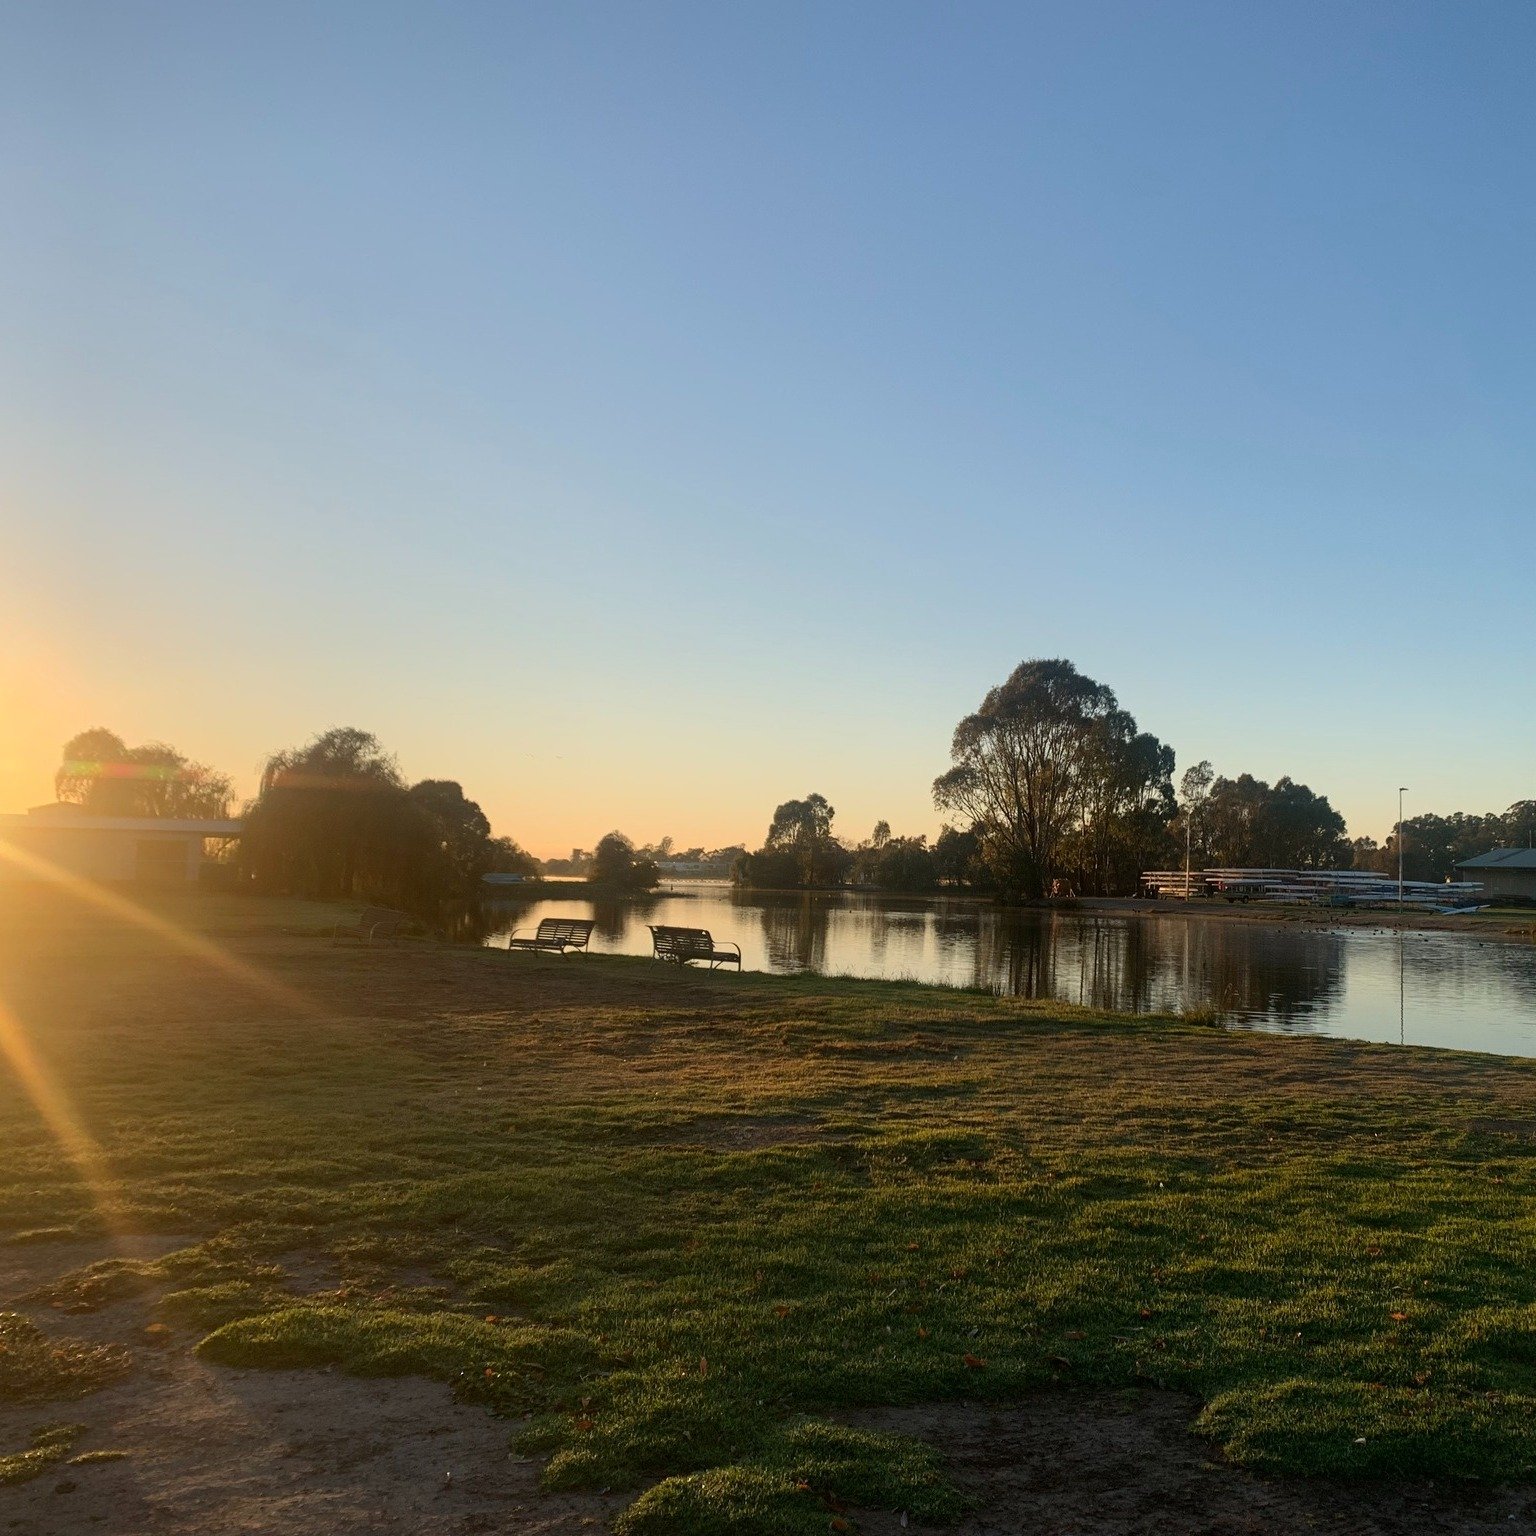 ☀️ Good morning from the Goulburn ☀️
This weekend is the Victorian Masters State Championships held in Nagambie and there's plenty of Barwon on-water action:

&gt; 9:00am - FMAB1X Heat (Inge Jabara)
&gt; 9:45am - FMAB1X Final (Inge Jabara)
&gt; 9:50a